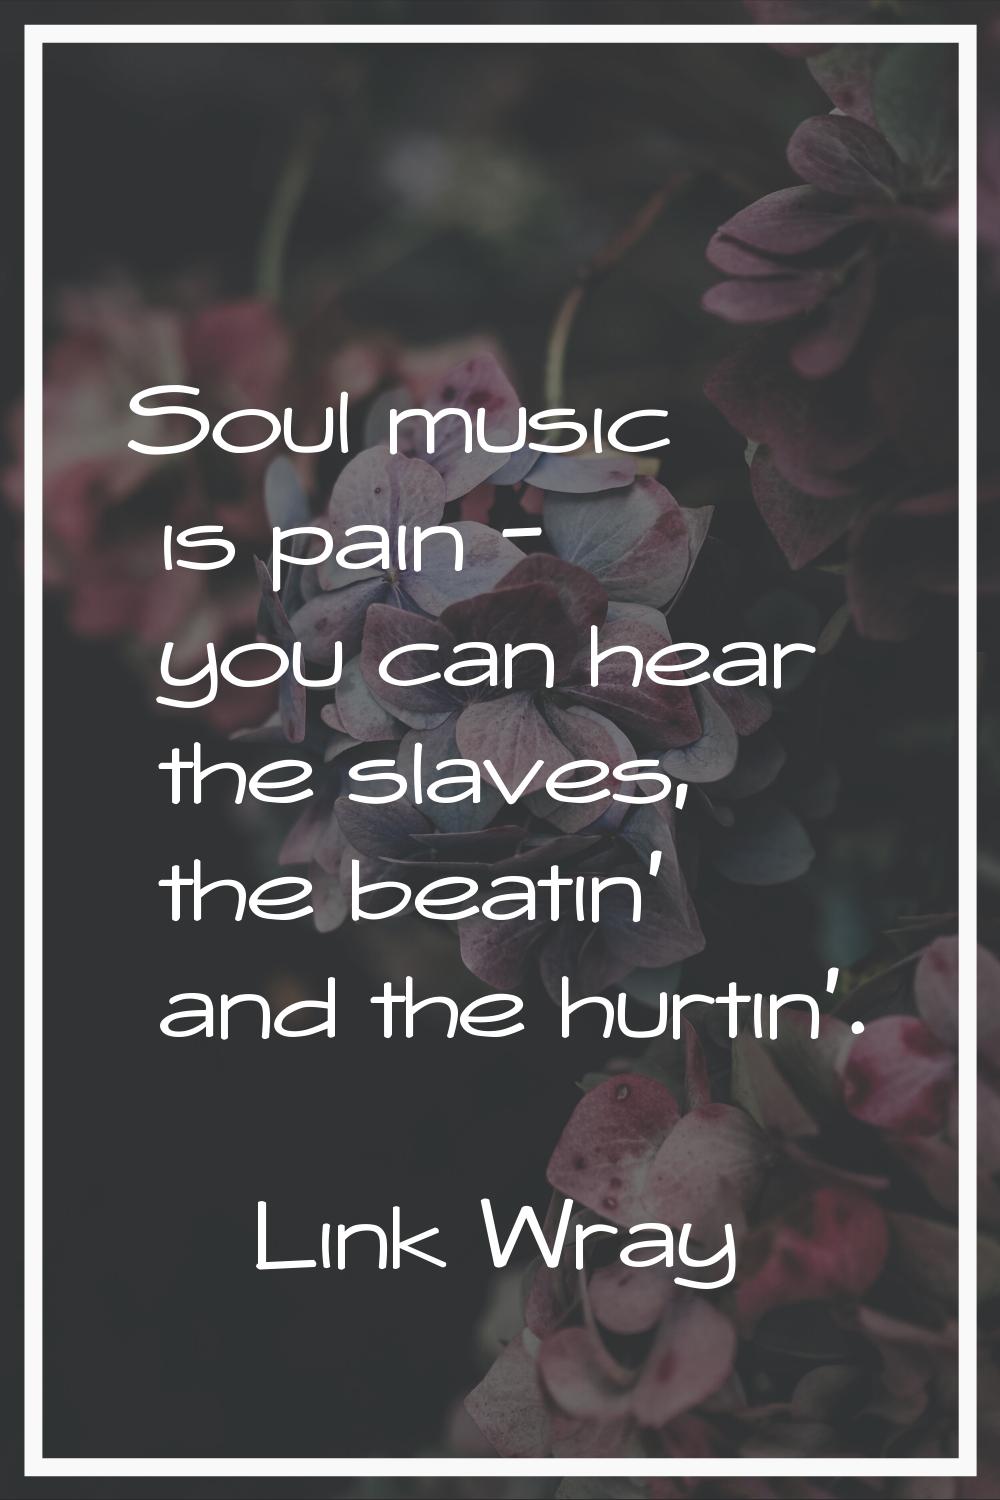 Soul music is pain - you can hear the slaves, the beatin' and the hurtin'.